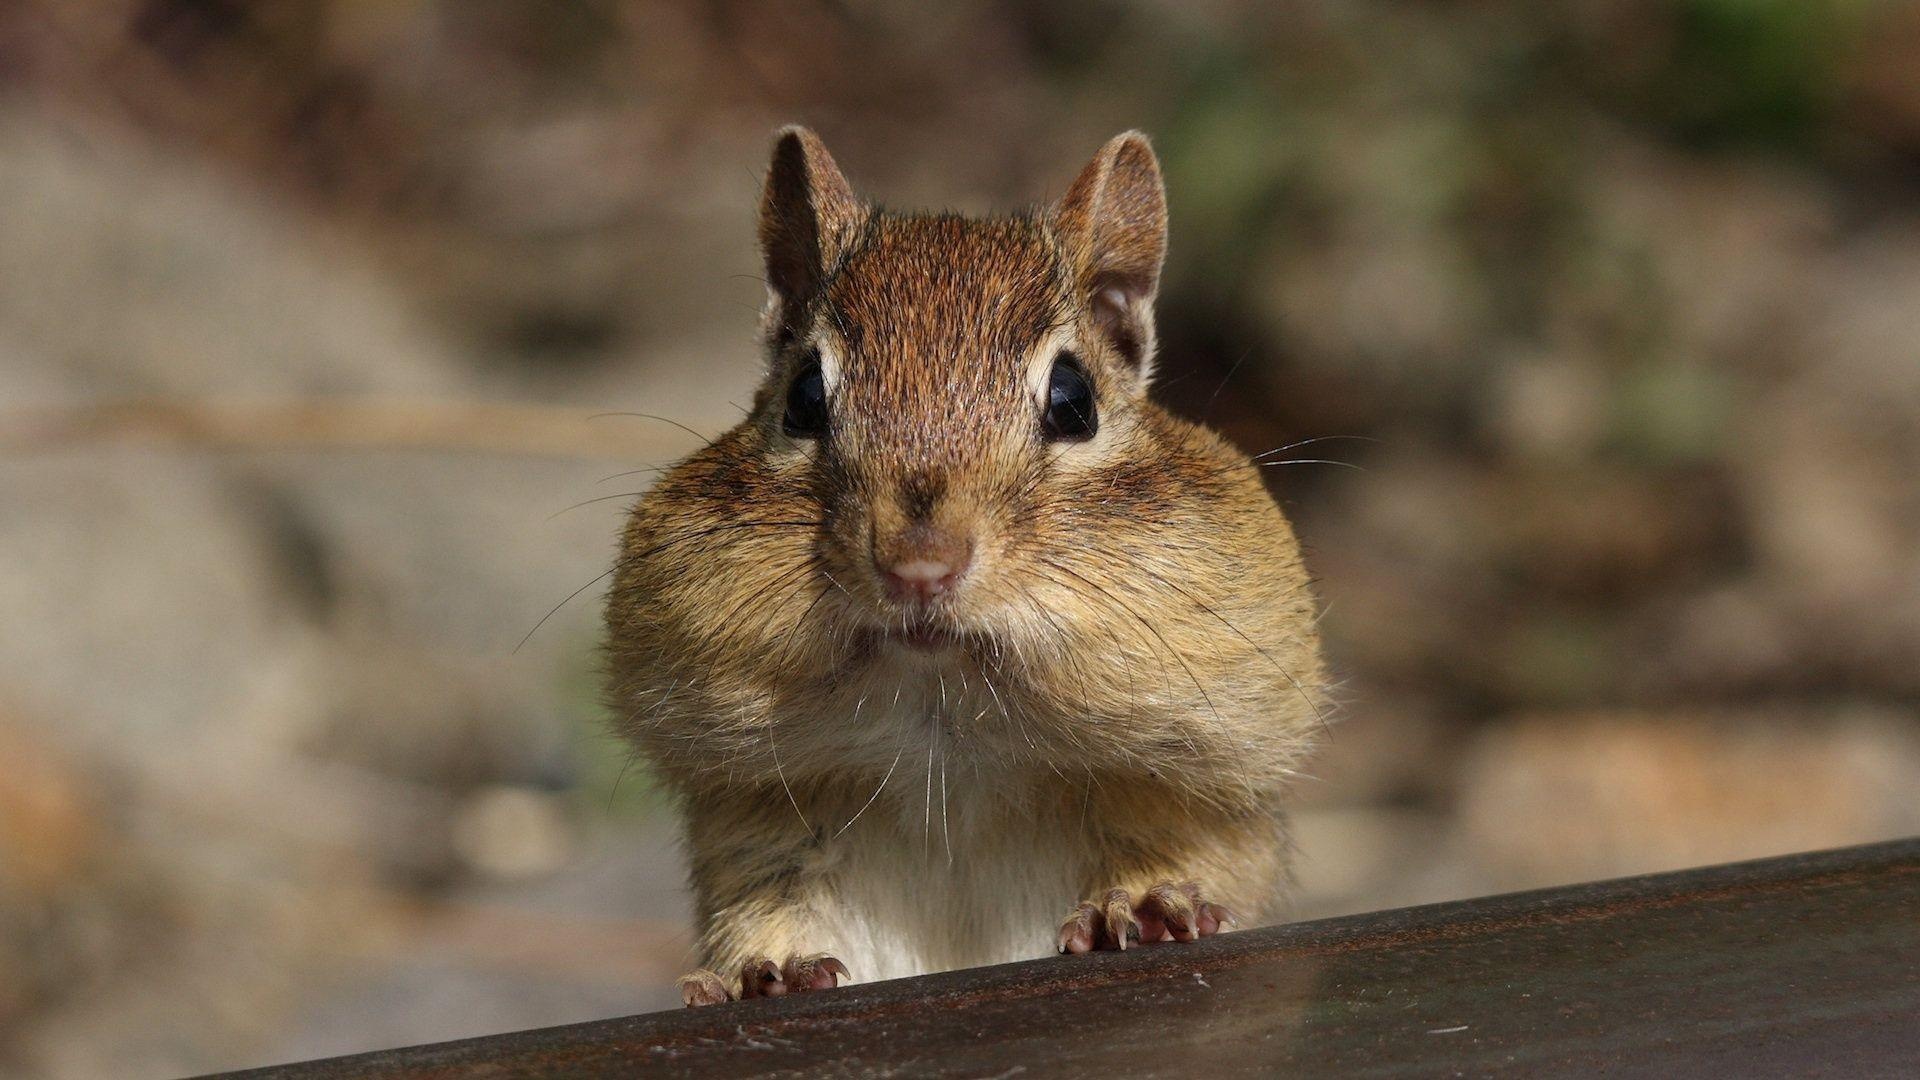 Chipmunk: Cheek pouches can stretch to be three times larger than the animal's head. 1920x1080 Full HD Wallpaper.